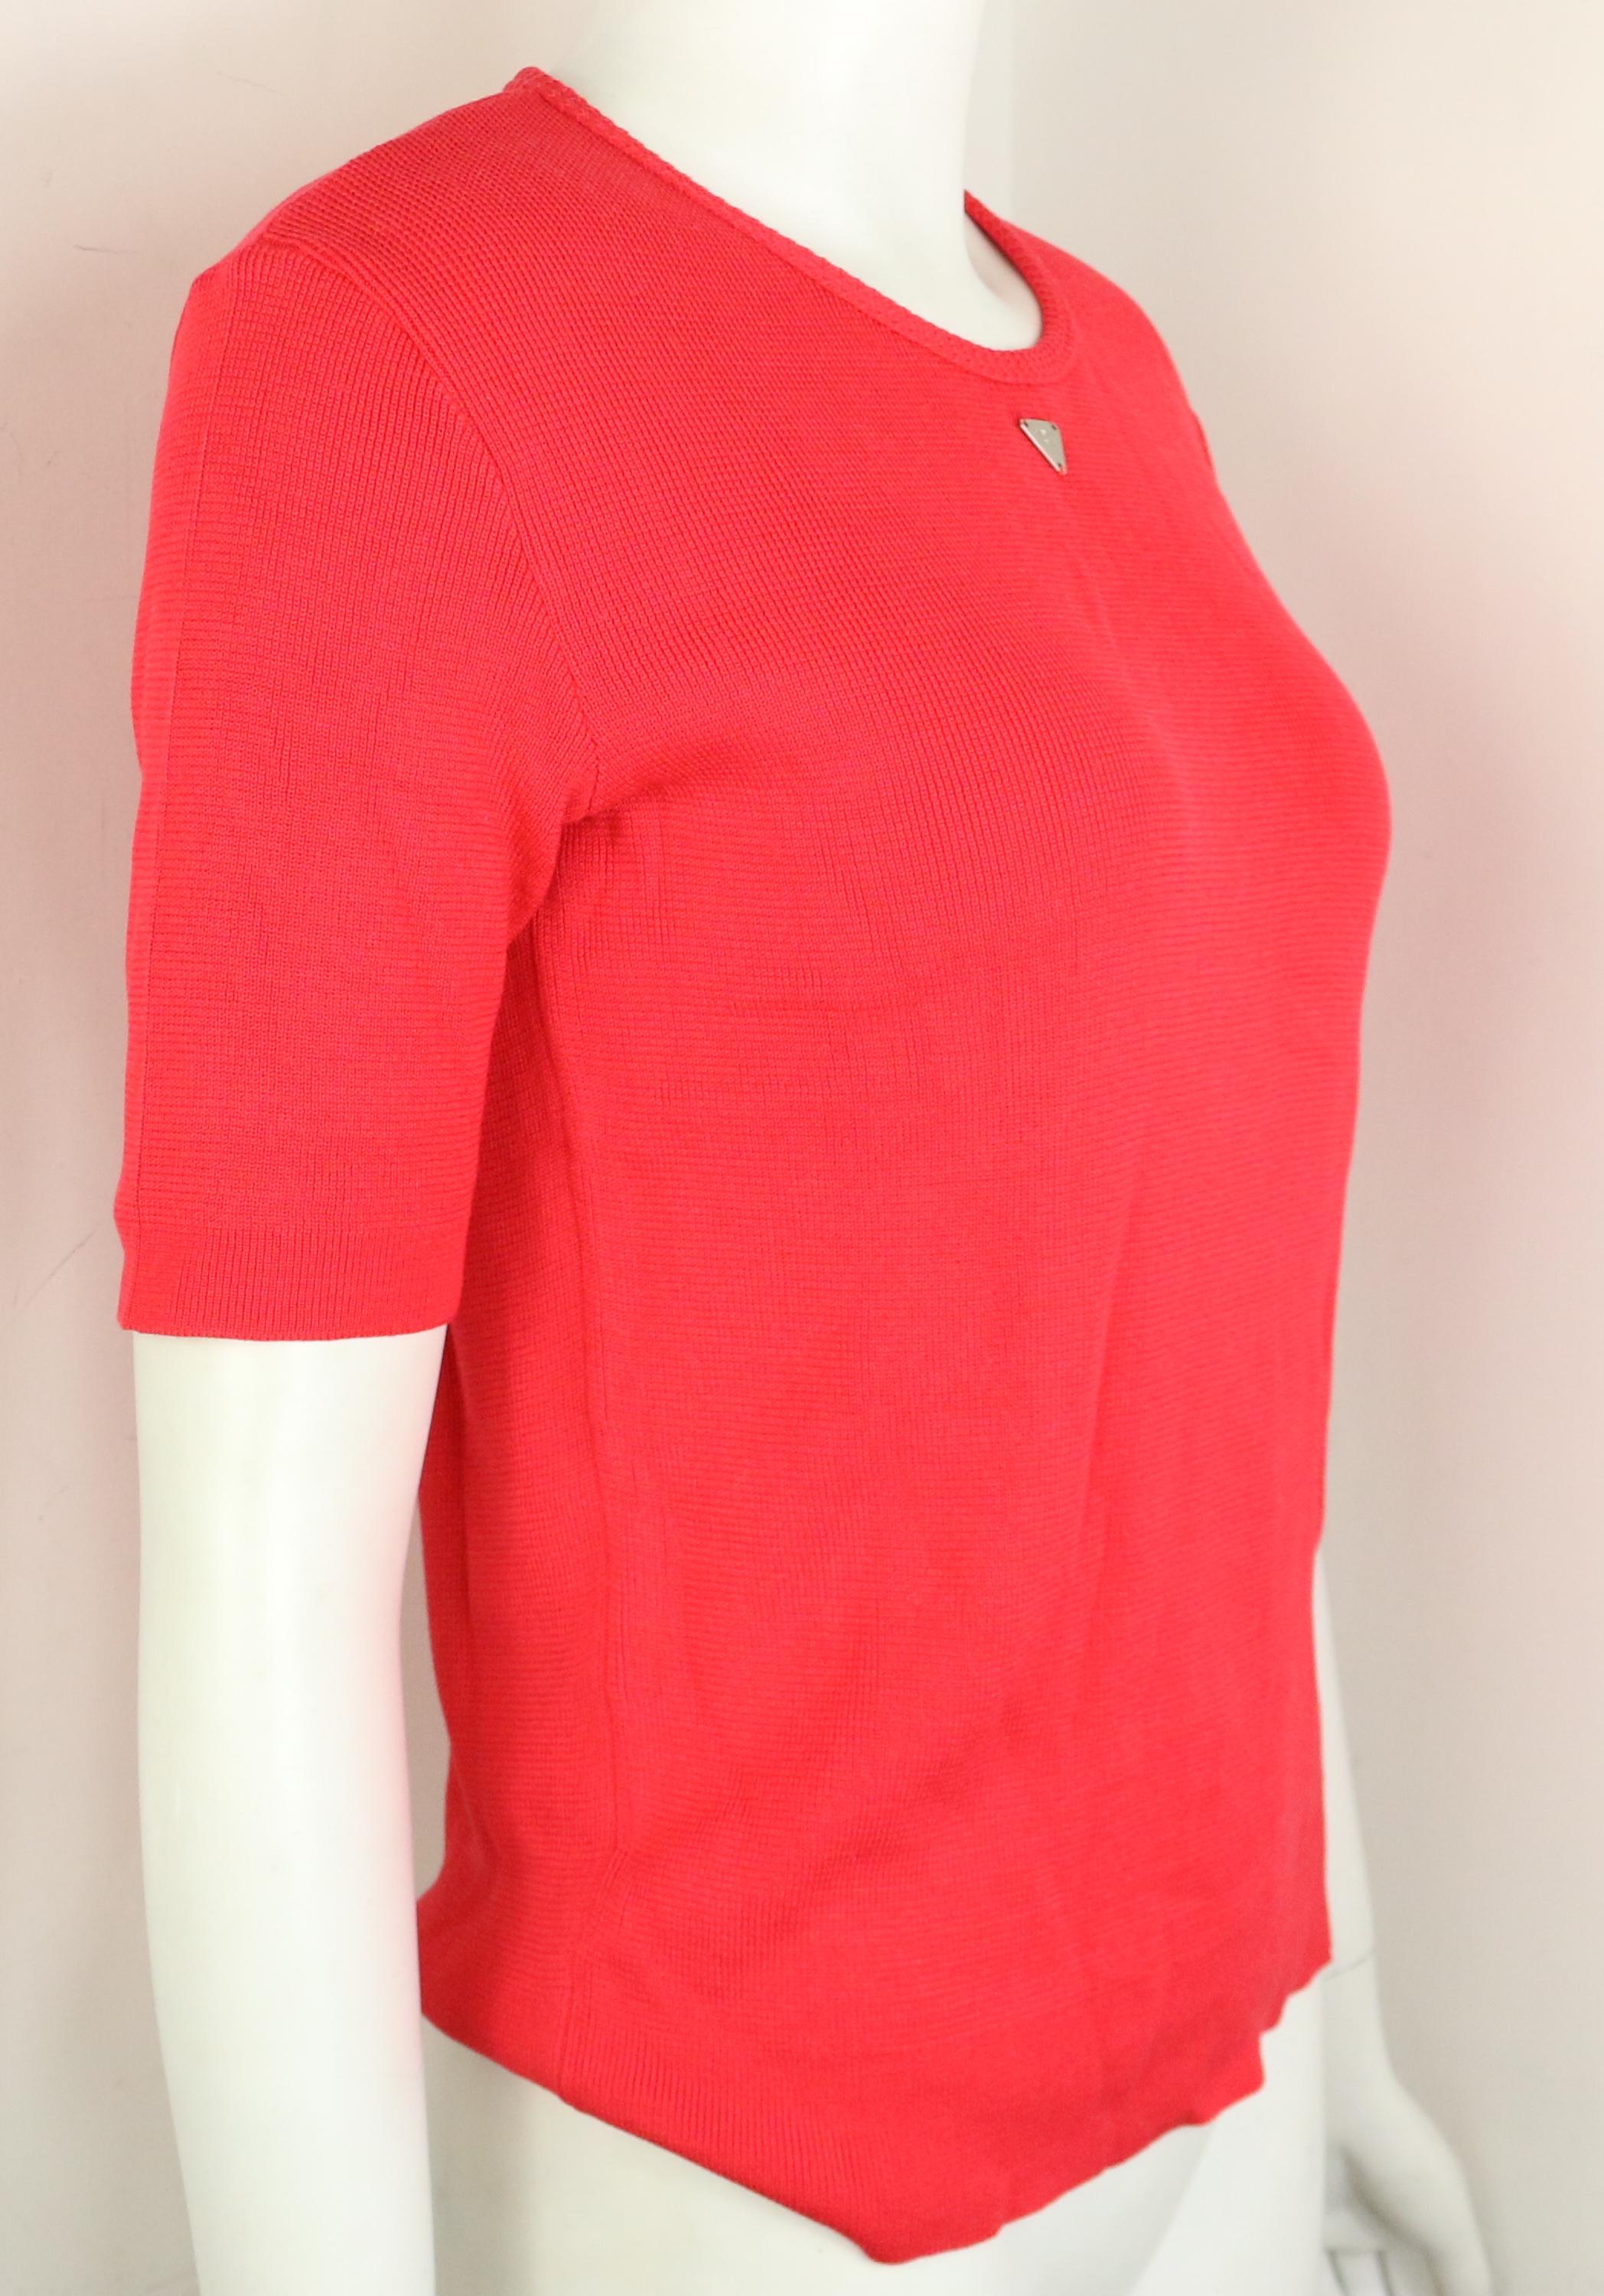 Chanel Red Knitted Cotton Top  In Excellent Condition For Sale In Sheung Wan, HK